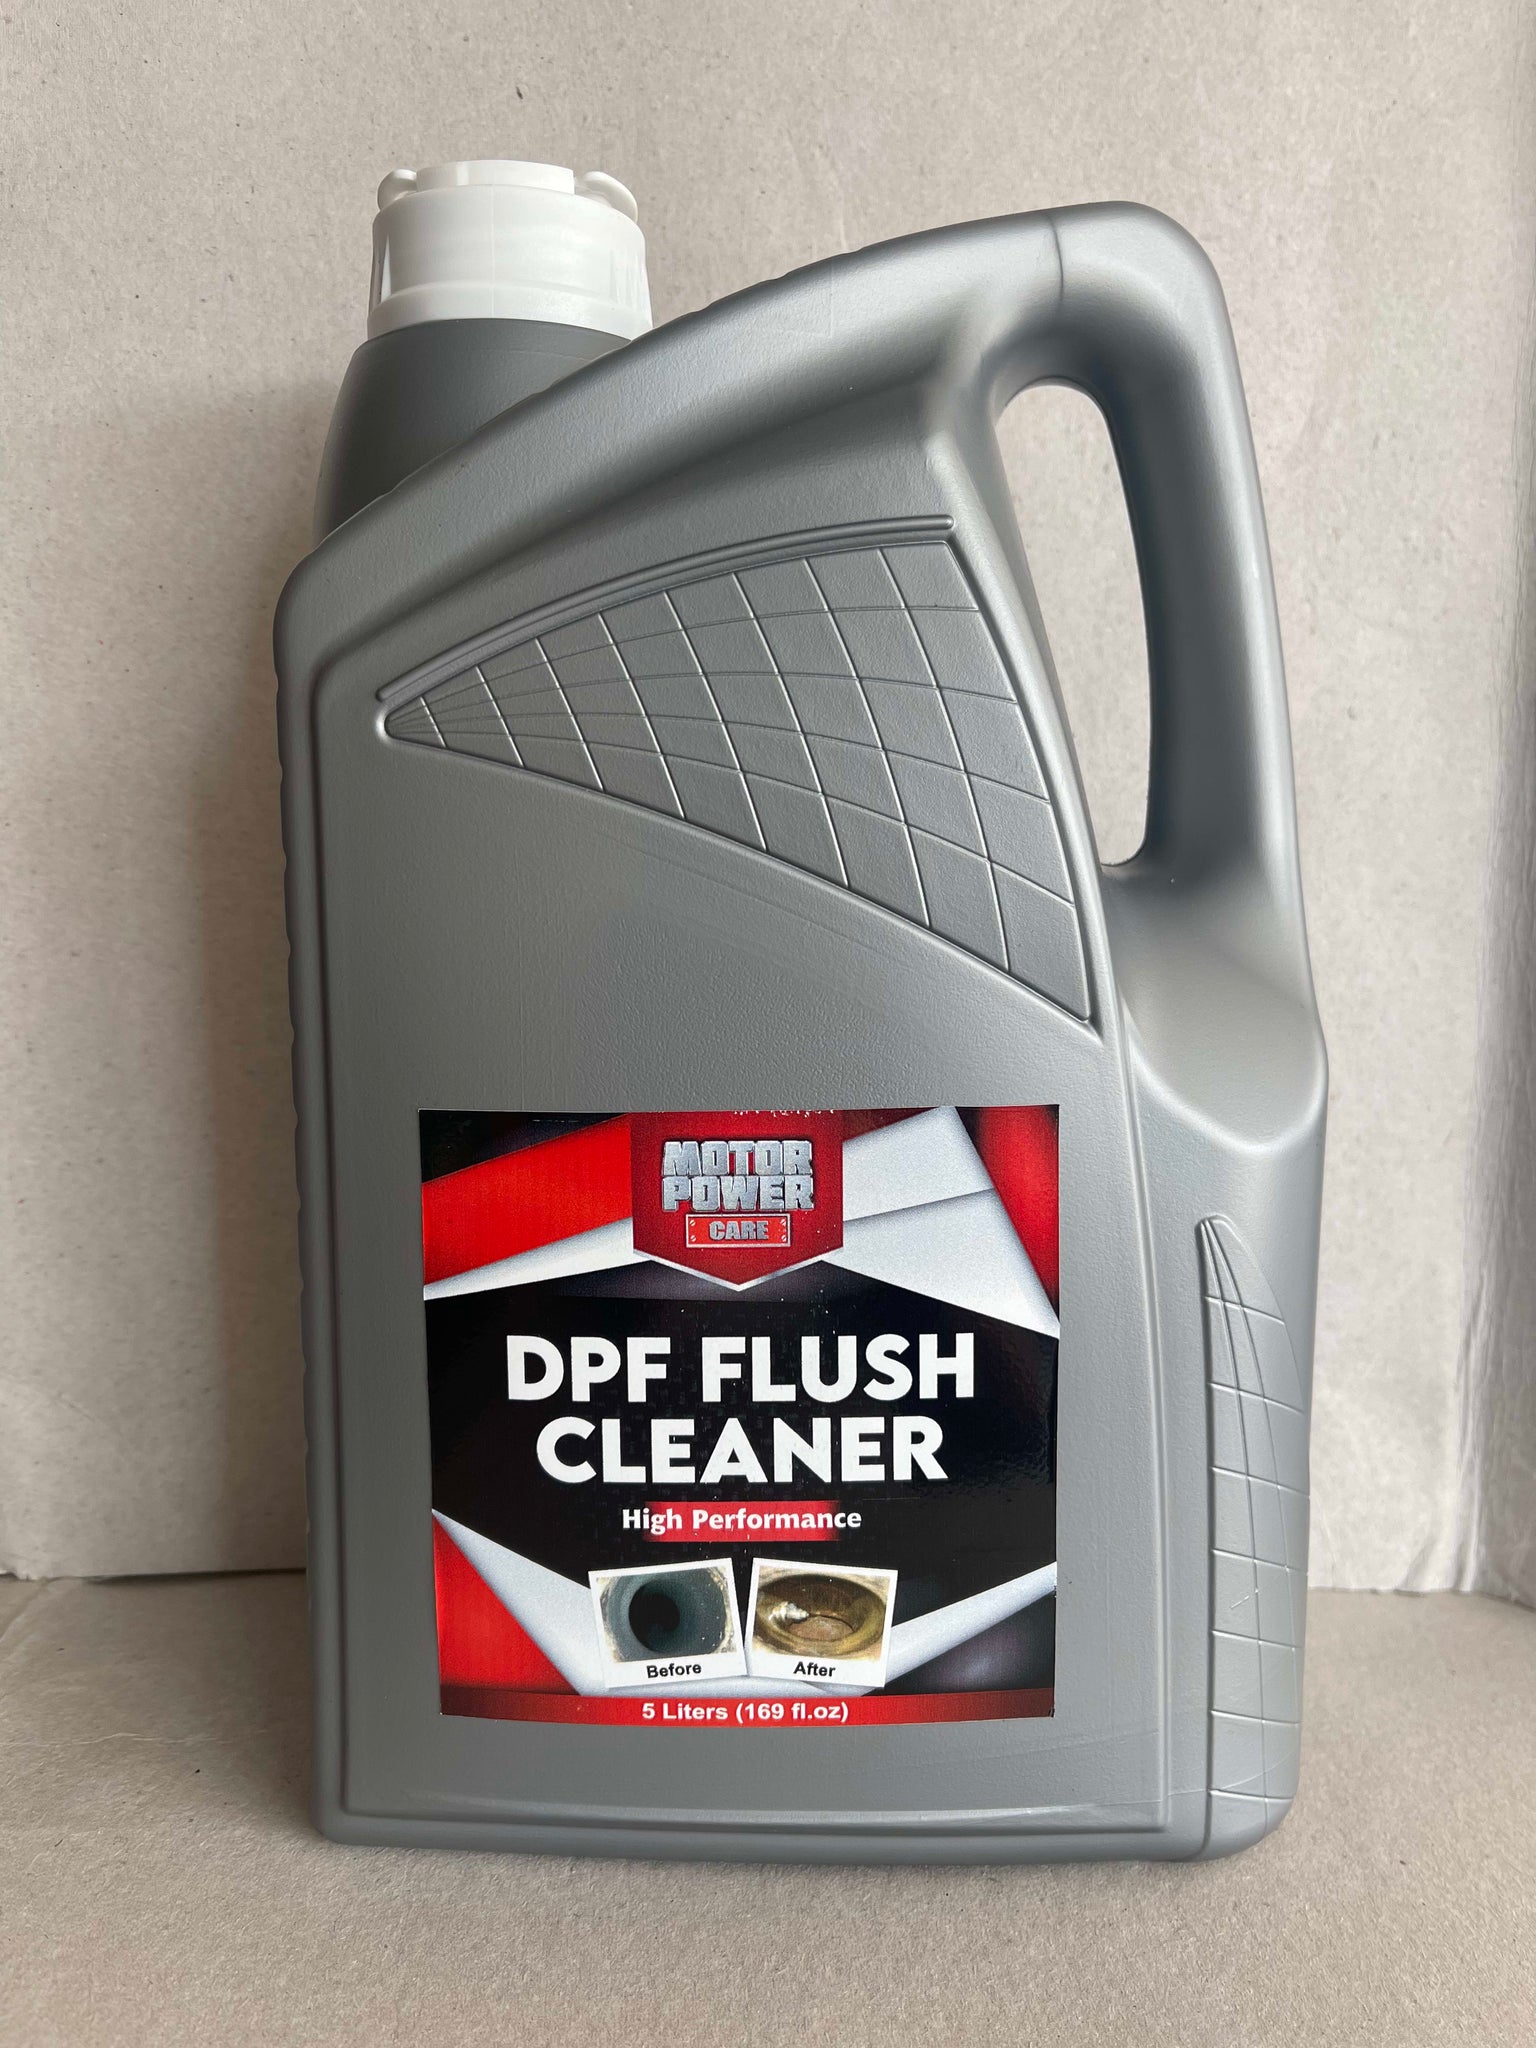 In-House DPF Cleaner Save Time and Money with Our Revolutionary